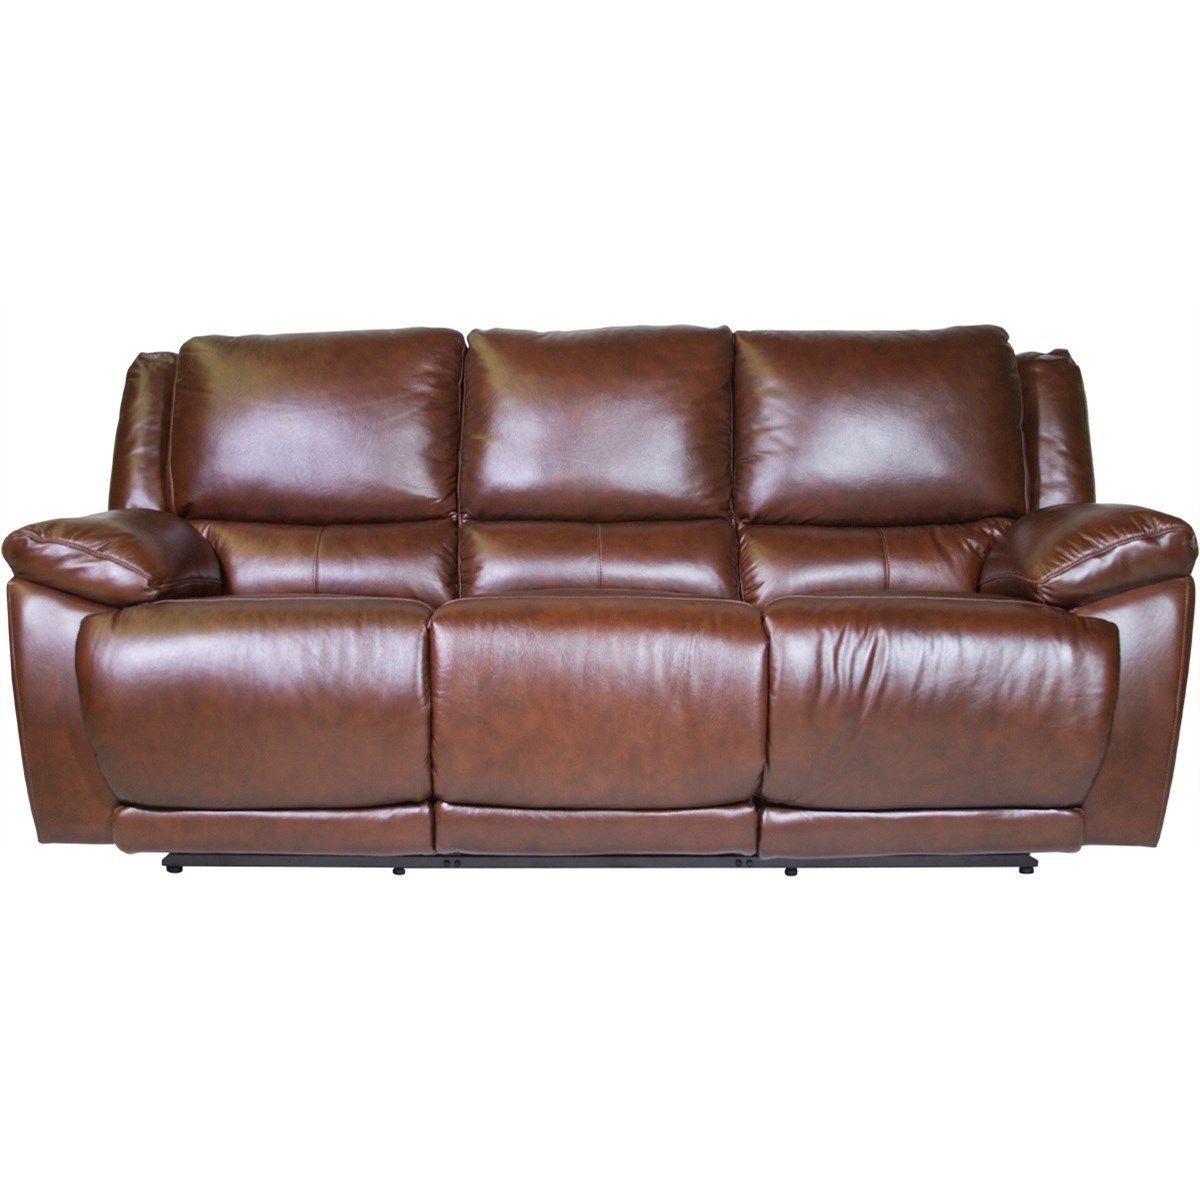 Futura Leather Curtis Power Reclining Sofa | Homeworld Inside Nolan Leather Power Reclining Sofas (View 6 of 15)